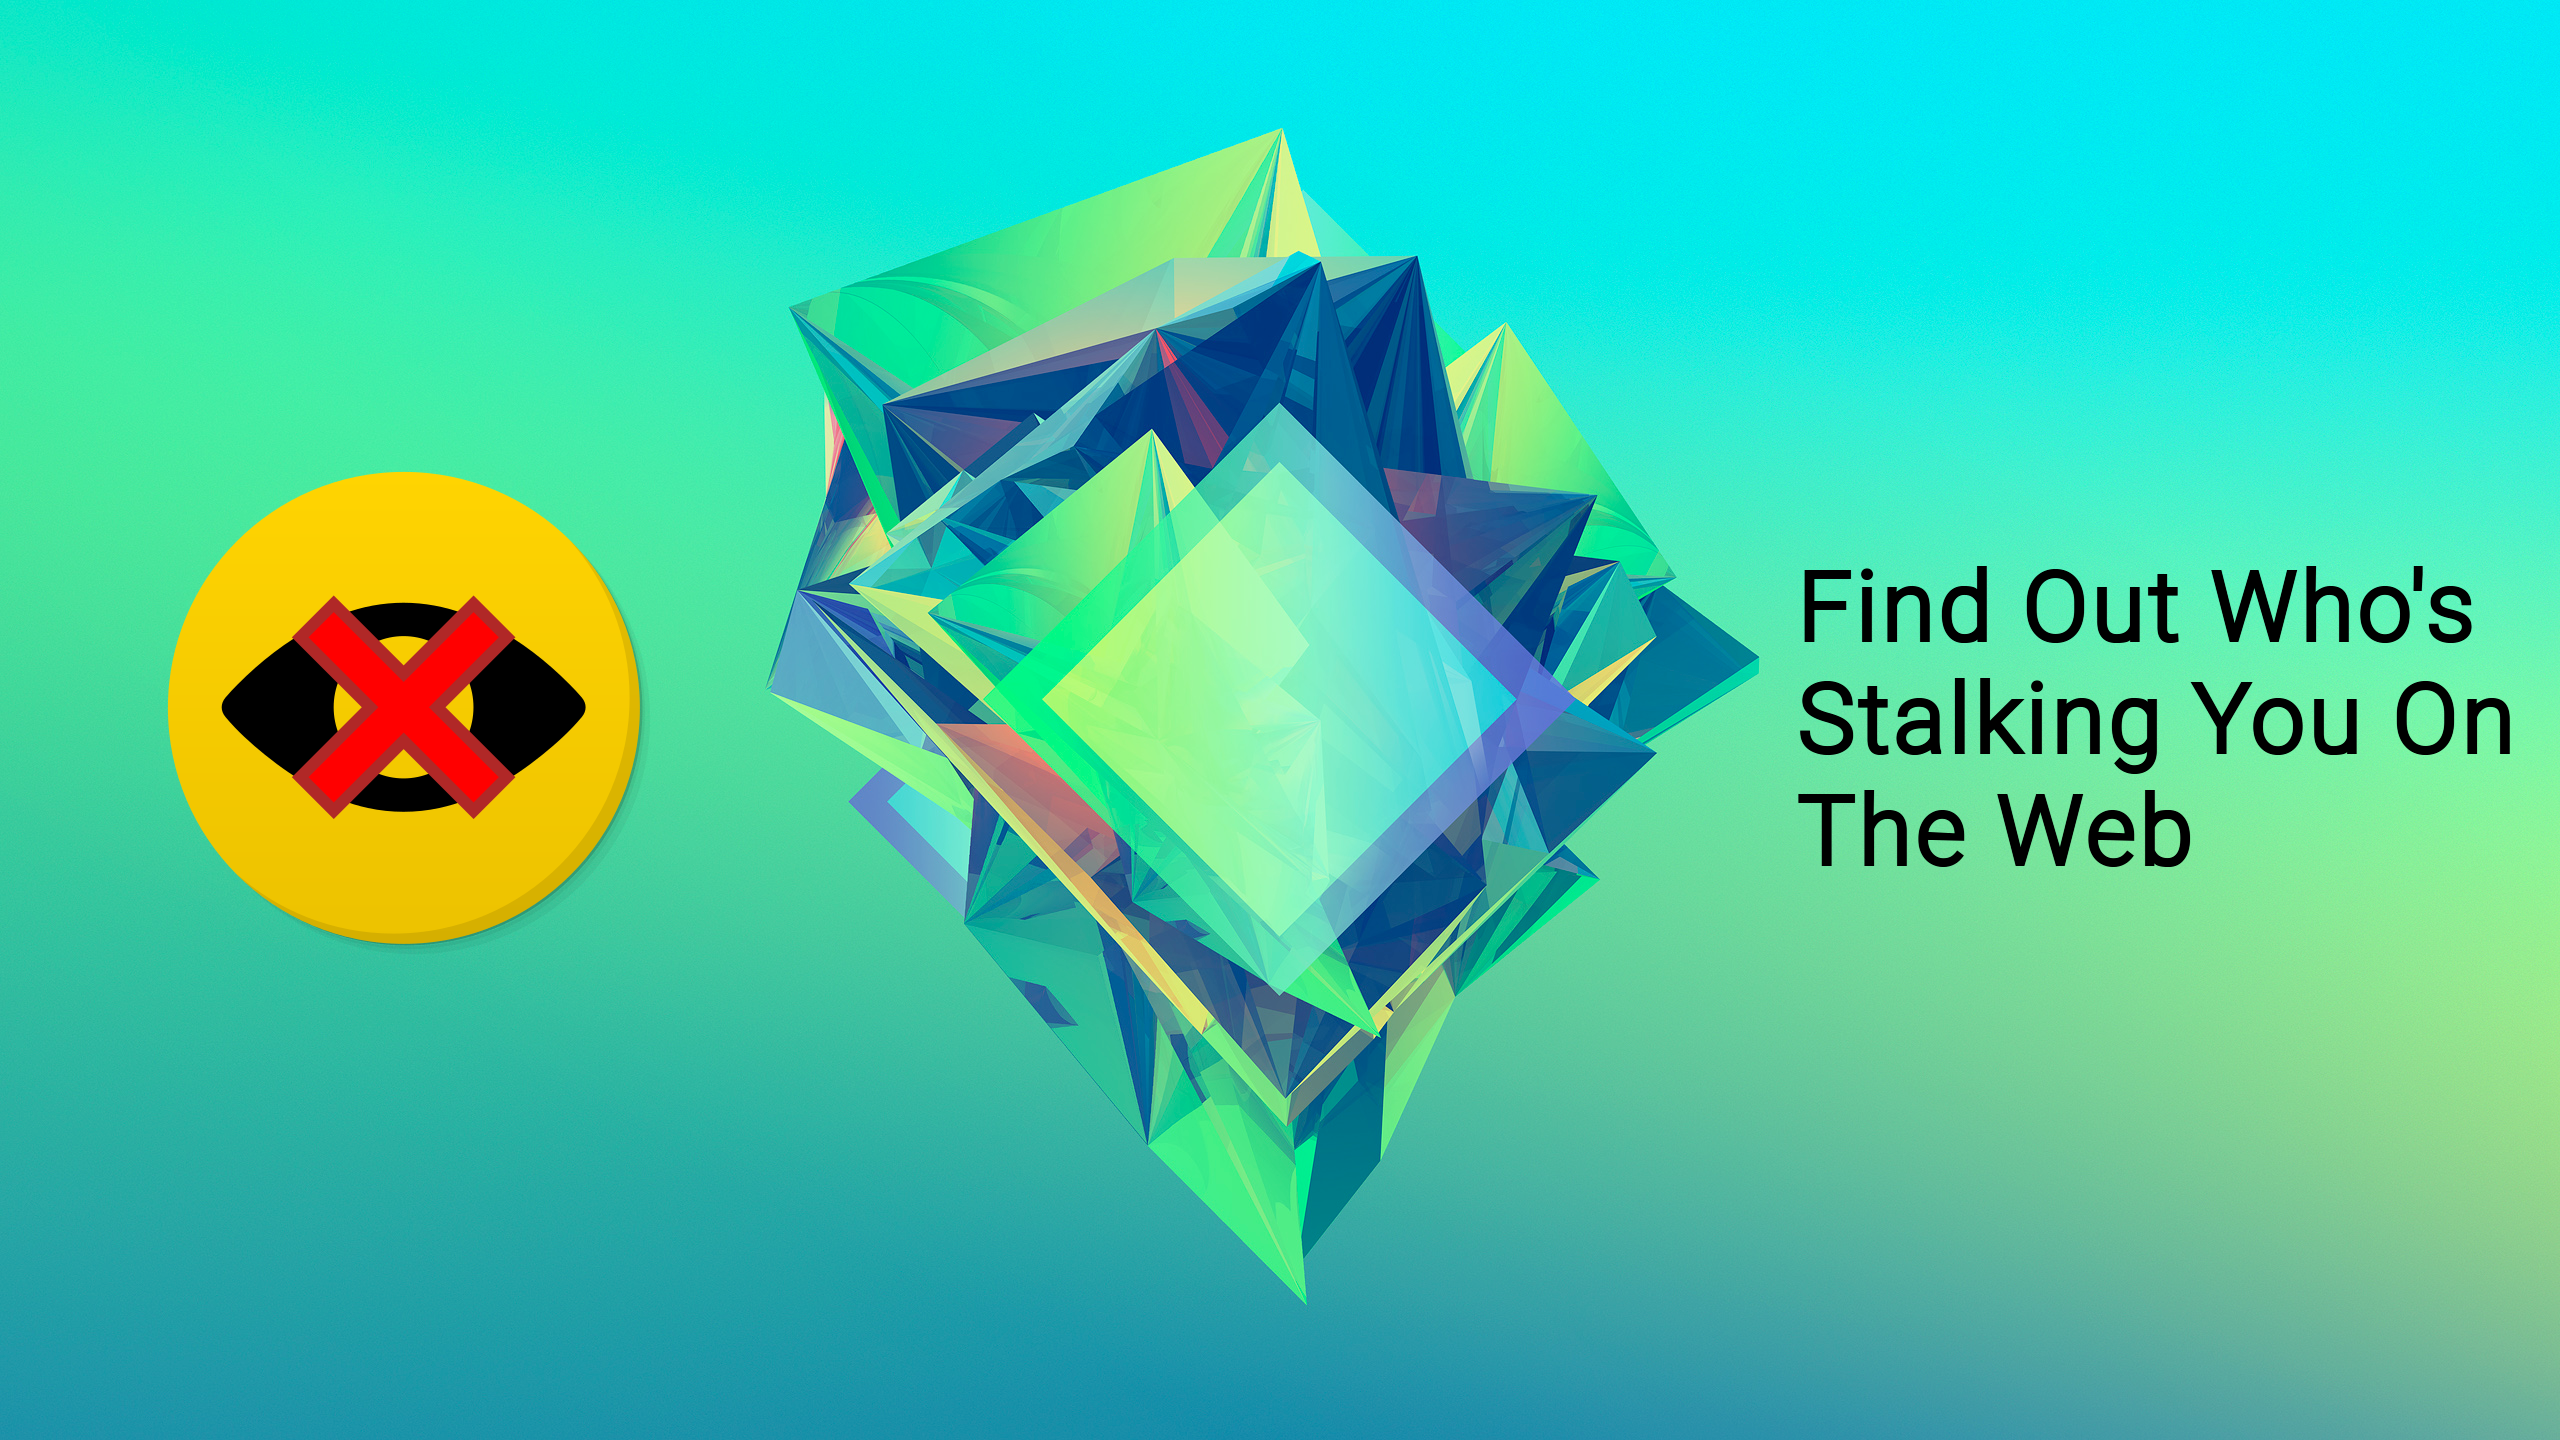 Find Out Who's Stalking You On The Web